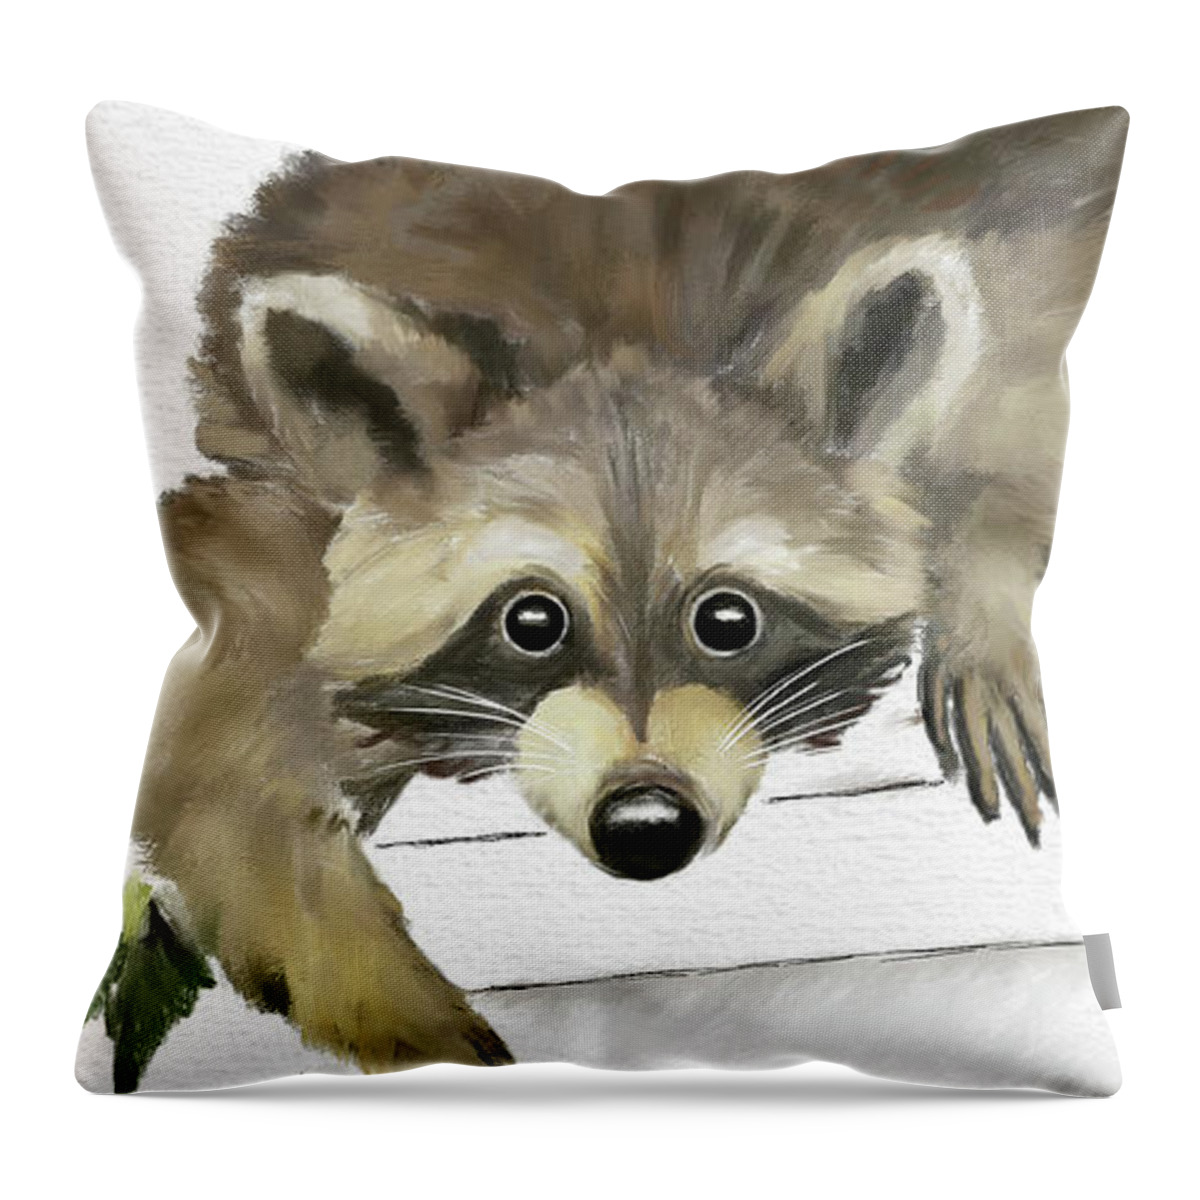 Animal Throw Pillow featuring the digital art You Rascal, You by Lois Bryan